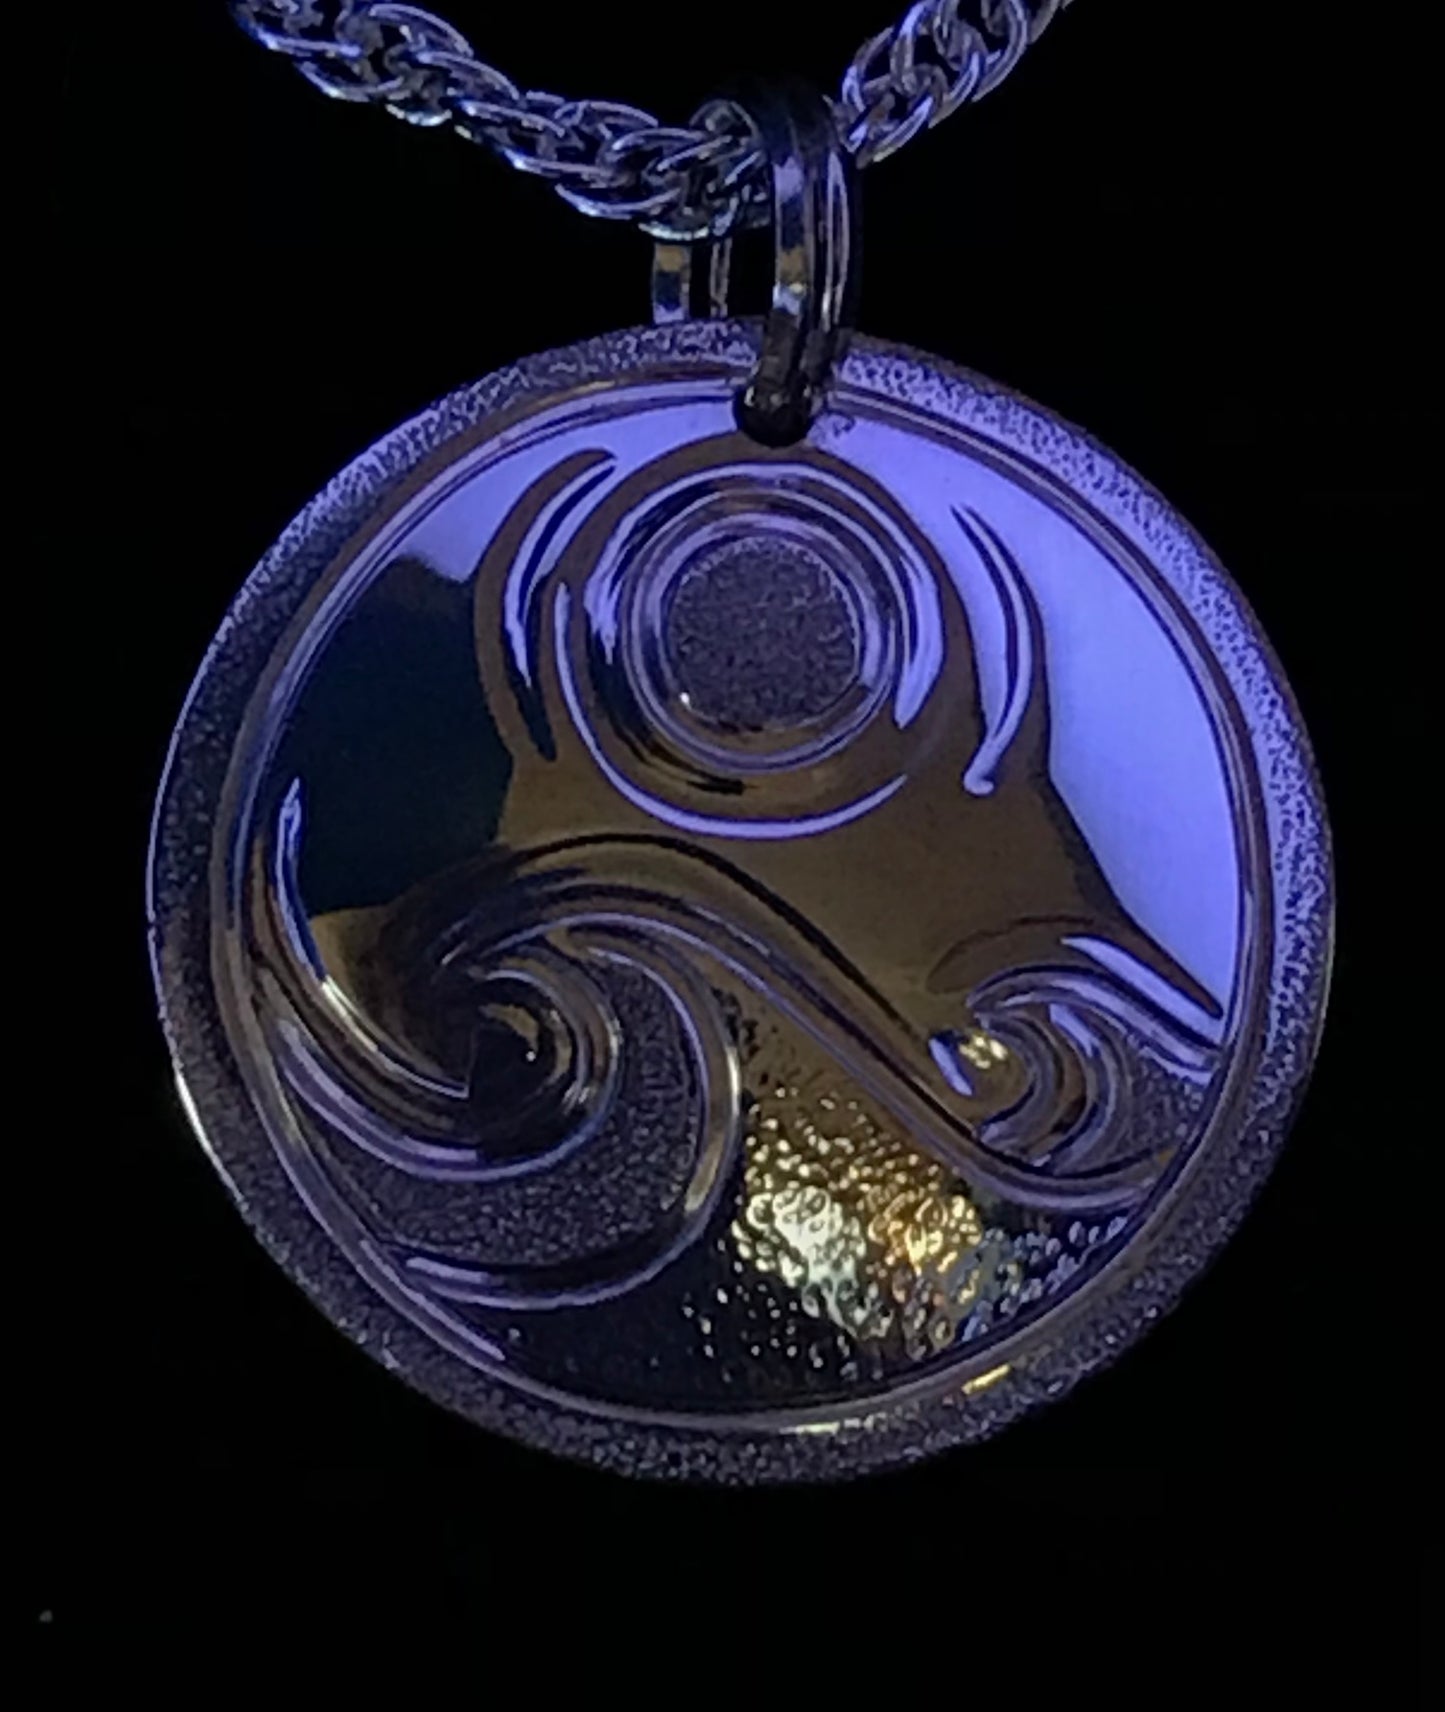 Lightly hammered wave to give the shimmer effect of water for the Waves & Full Moon ss pendant by Laura Dutheil.